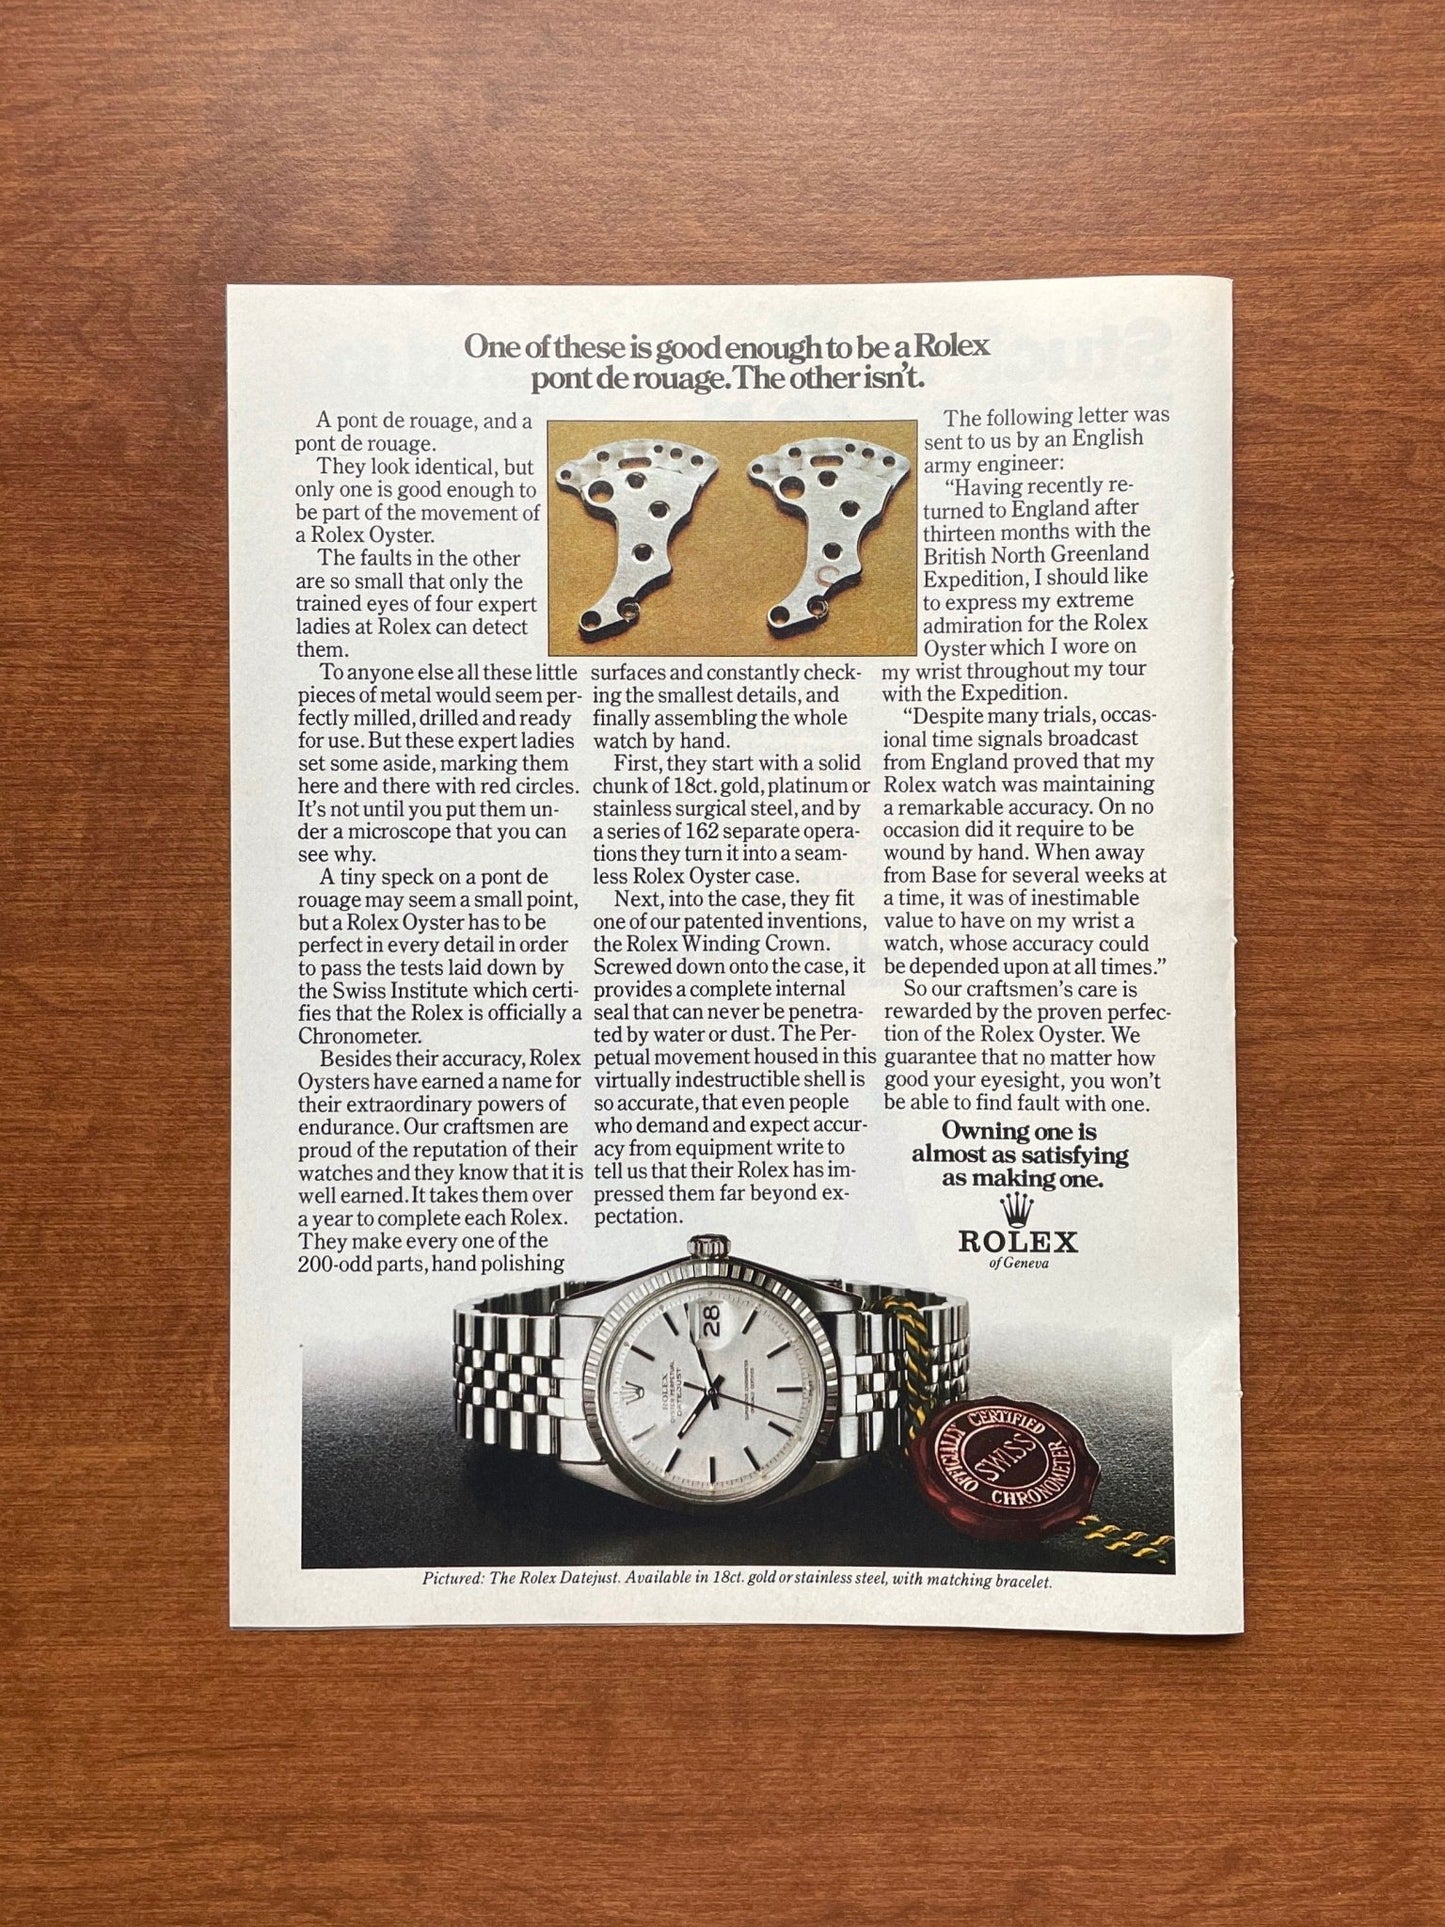 1973 Rolex Datejust Ref. 1603 "The other isn't." Advertisement